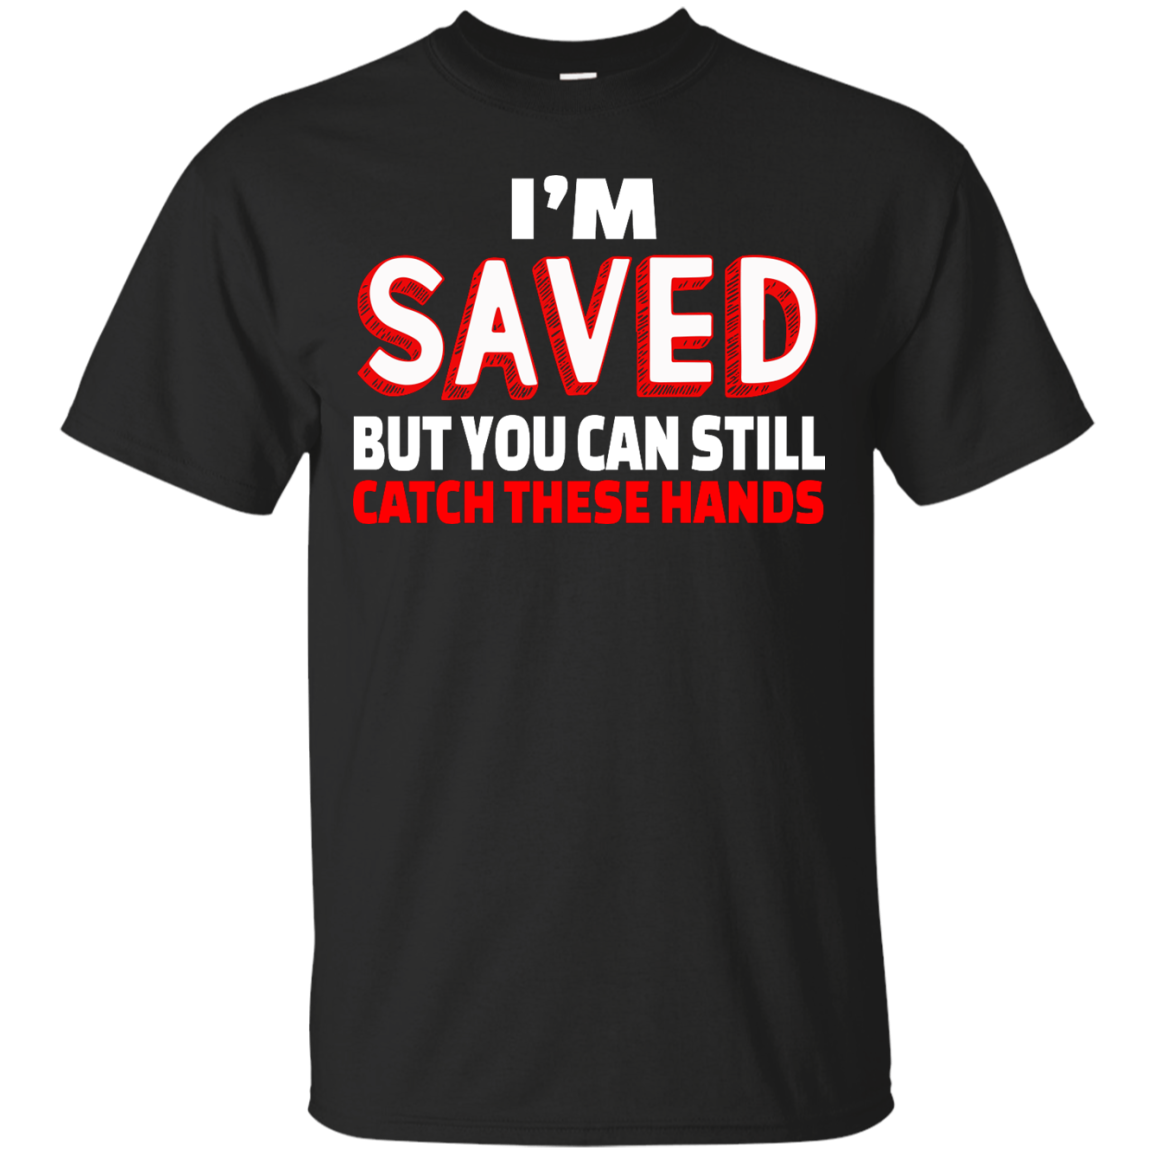 I'm Saved But You Can Still Catch These Hands shirt, tank, racerback